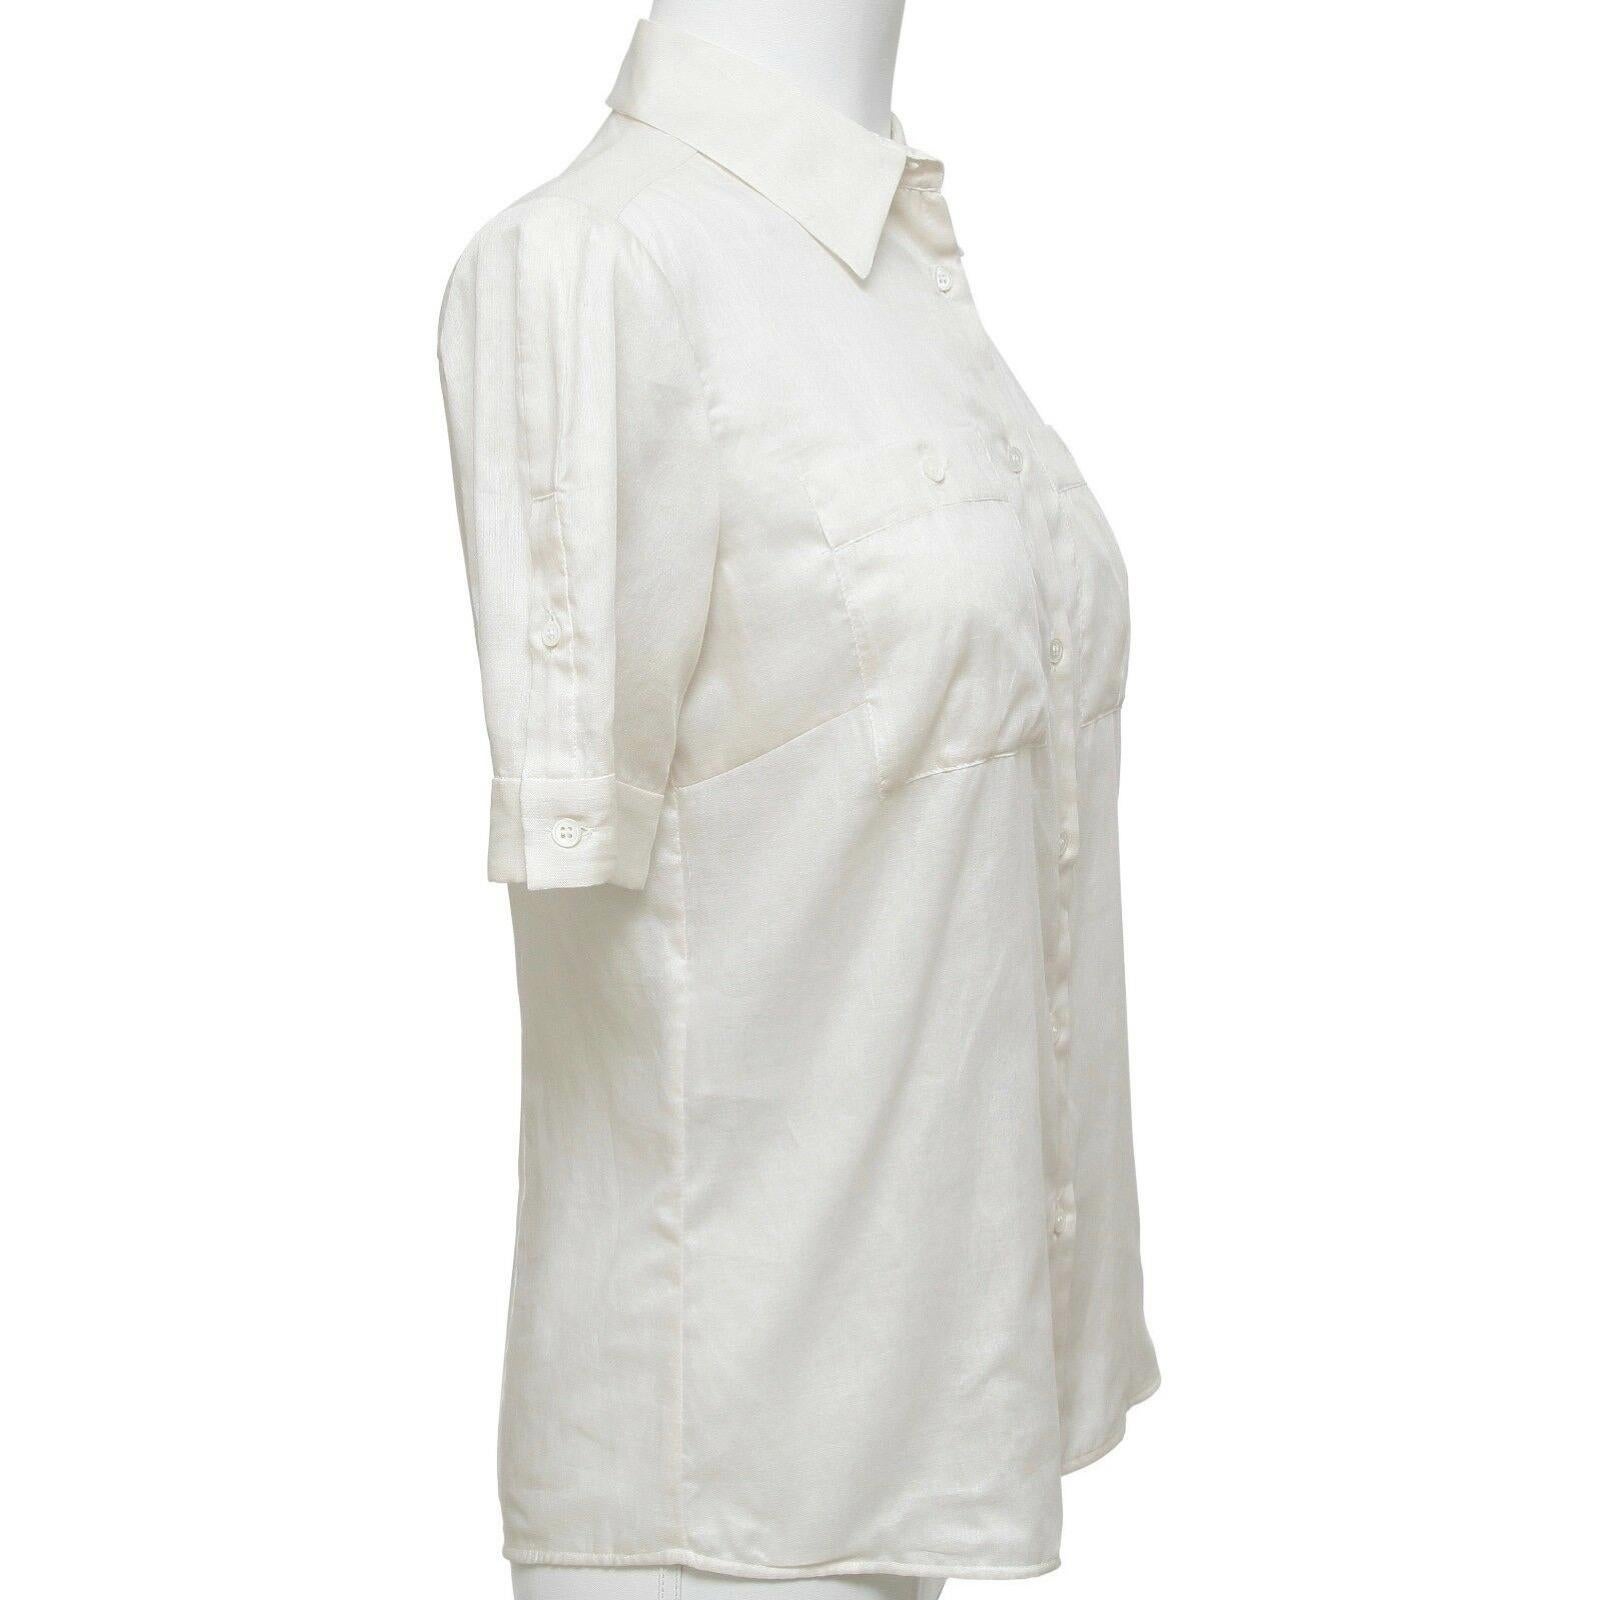 GUARANTEED AUTHENTIC CHIC MIU MIU IVORY COTTON BUTTON DOWN BLOUSE


Details:
o Ivory semi-sheer buddon down front cotton top.
o Short sleeve, buttons on each sleeve.
o Dual front pockets.
o Comes with extra button.

Fabric: 100% Cotton

Size: